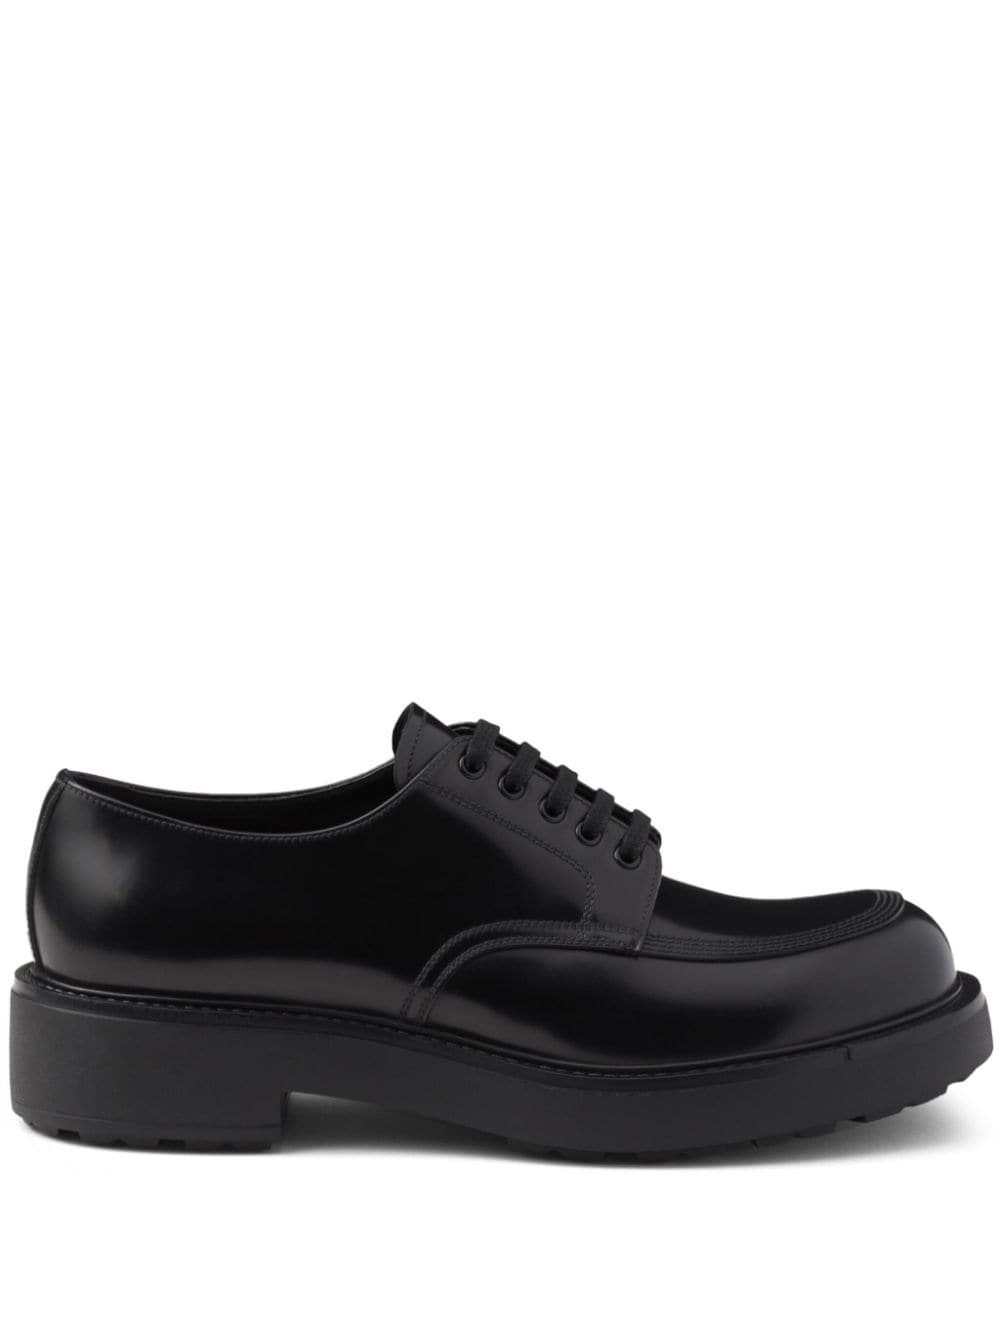 Prada Polished Leather Derby Shoes In Black